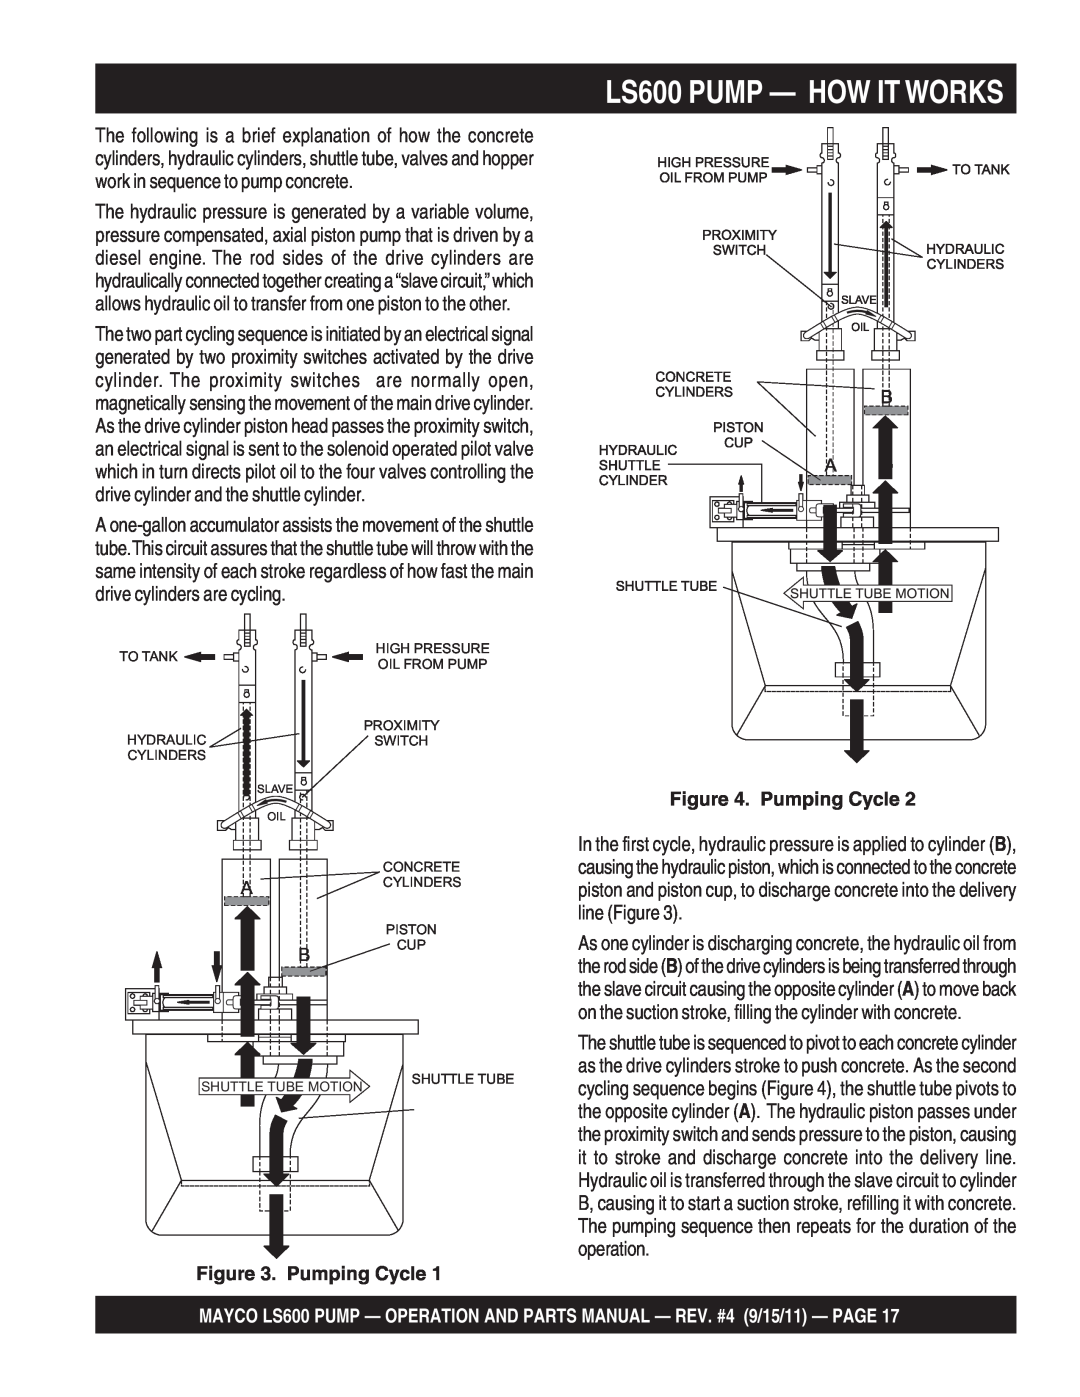 Multiquip manual LS600 PUMP — HOW IT WORKS, Pumping Cycle 